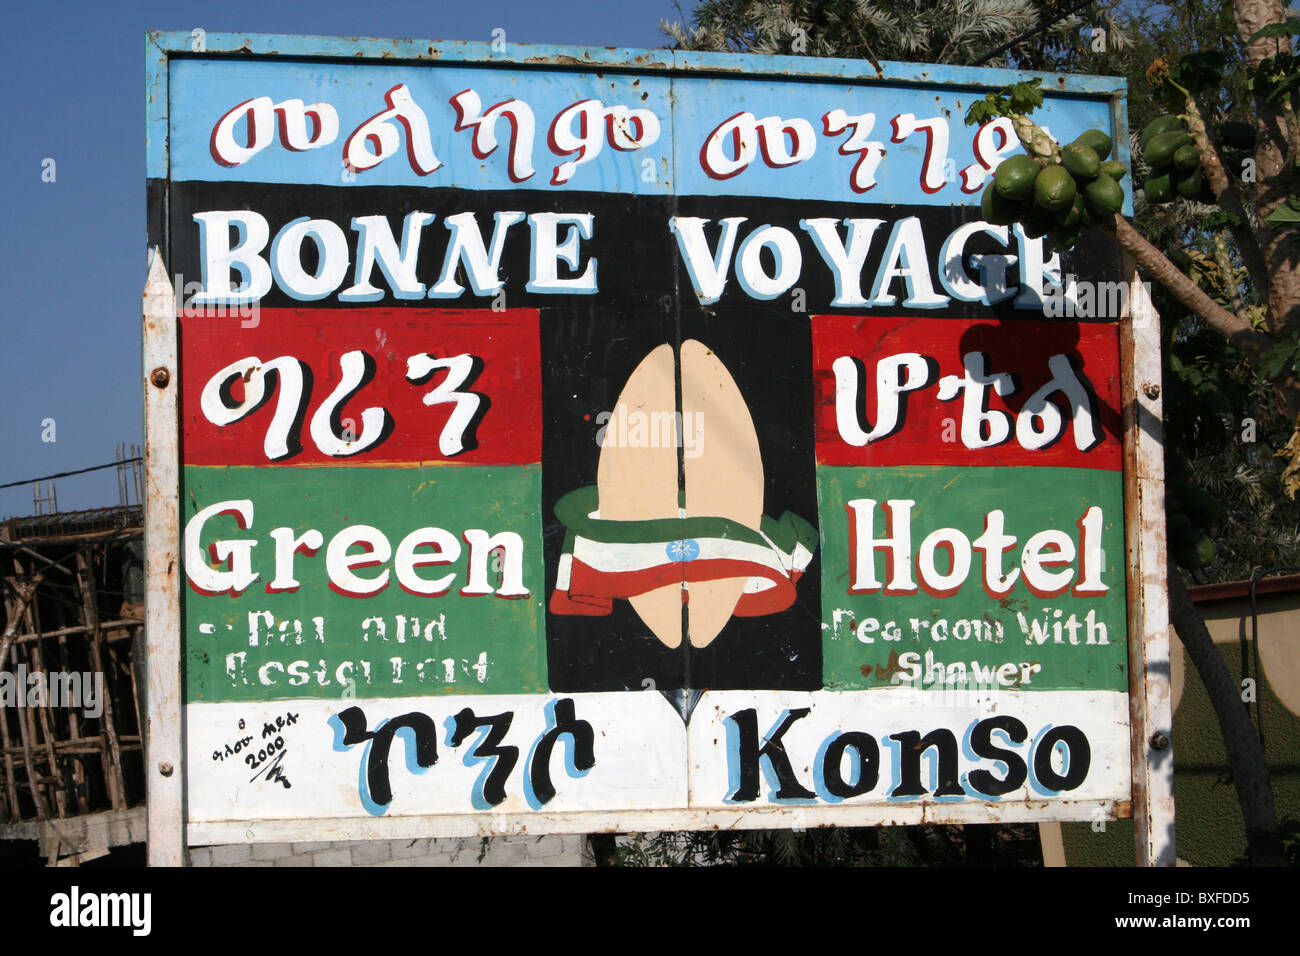 Sign For The 'Green Hotel' Tourist Accommodation In Konso, Ethiopia Stock Photo